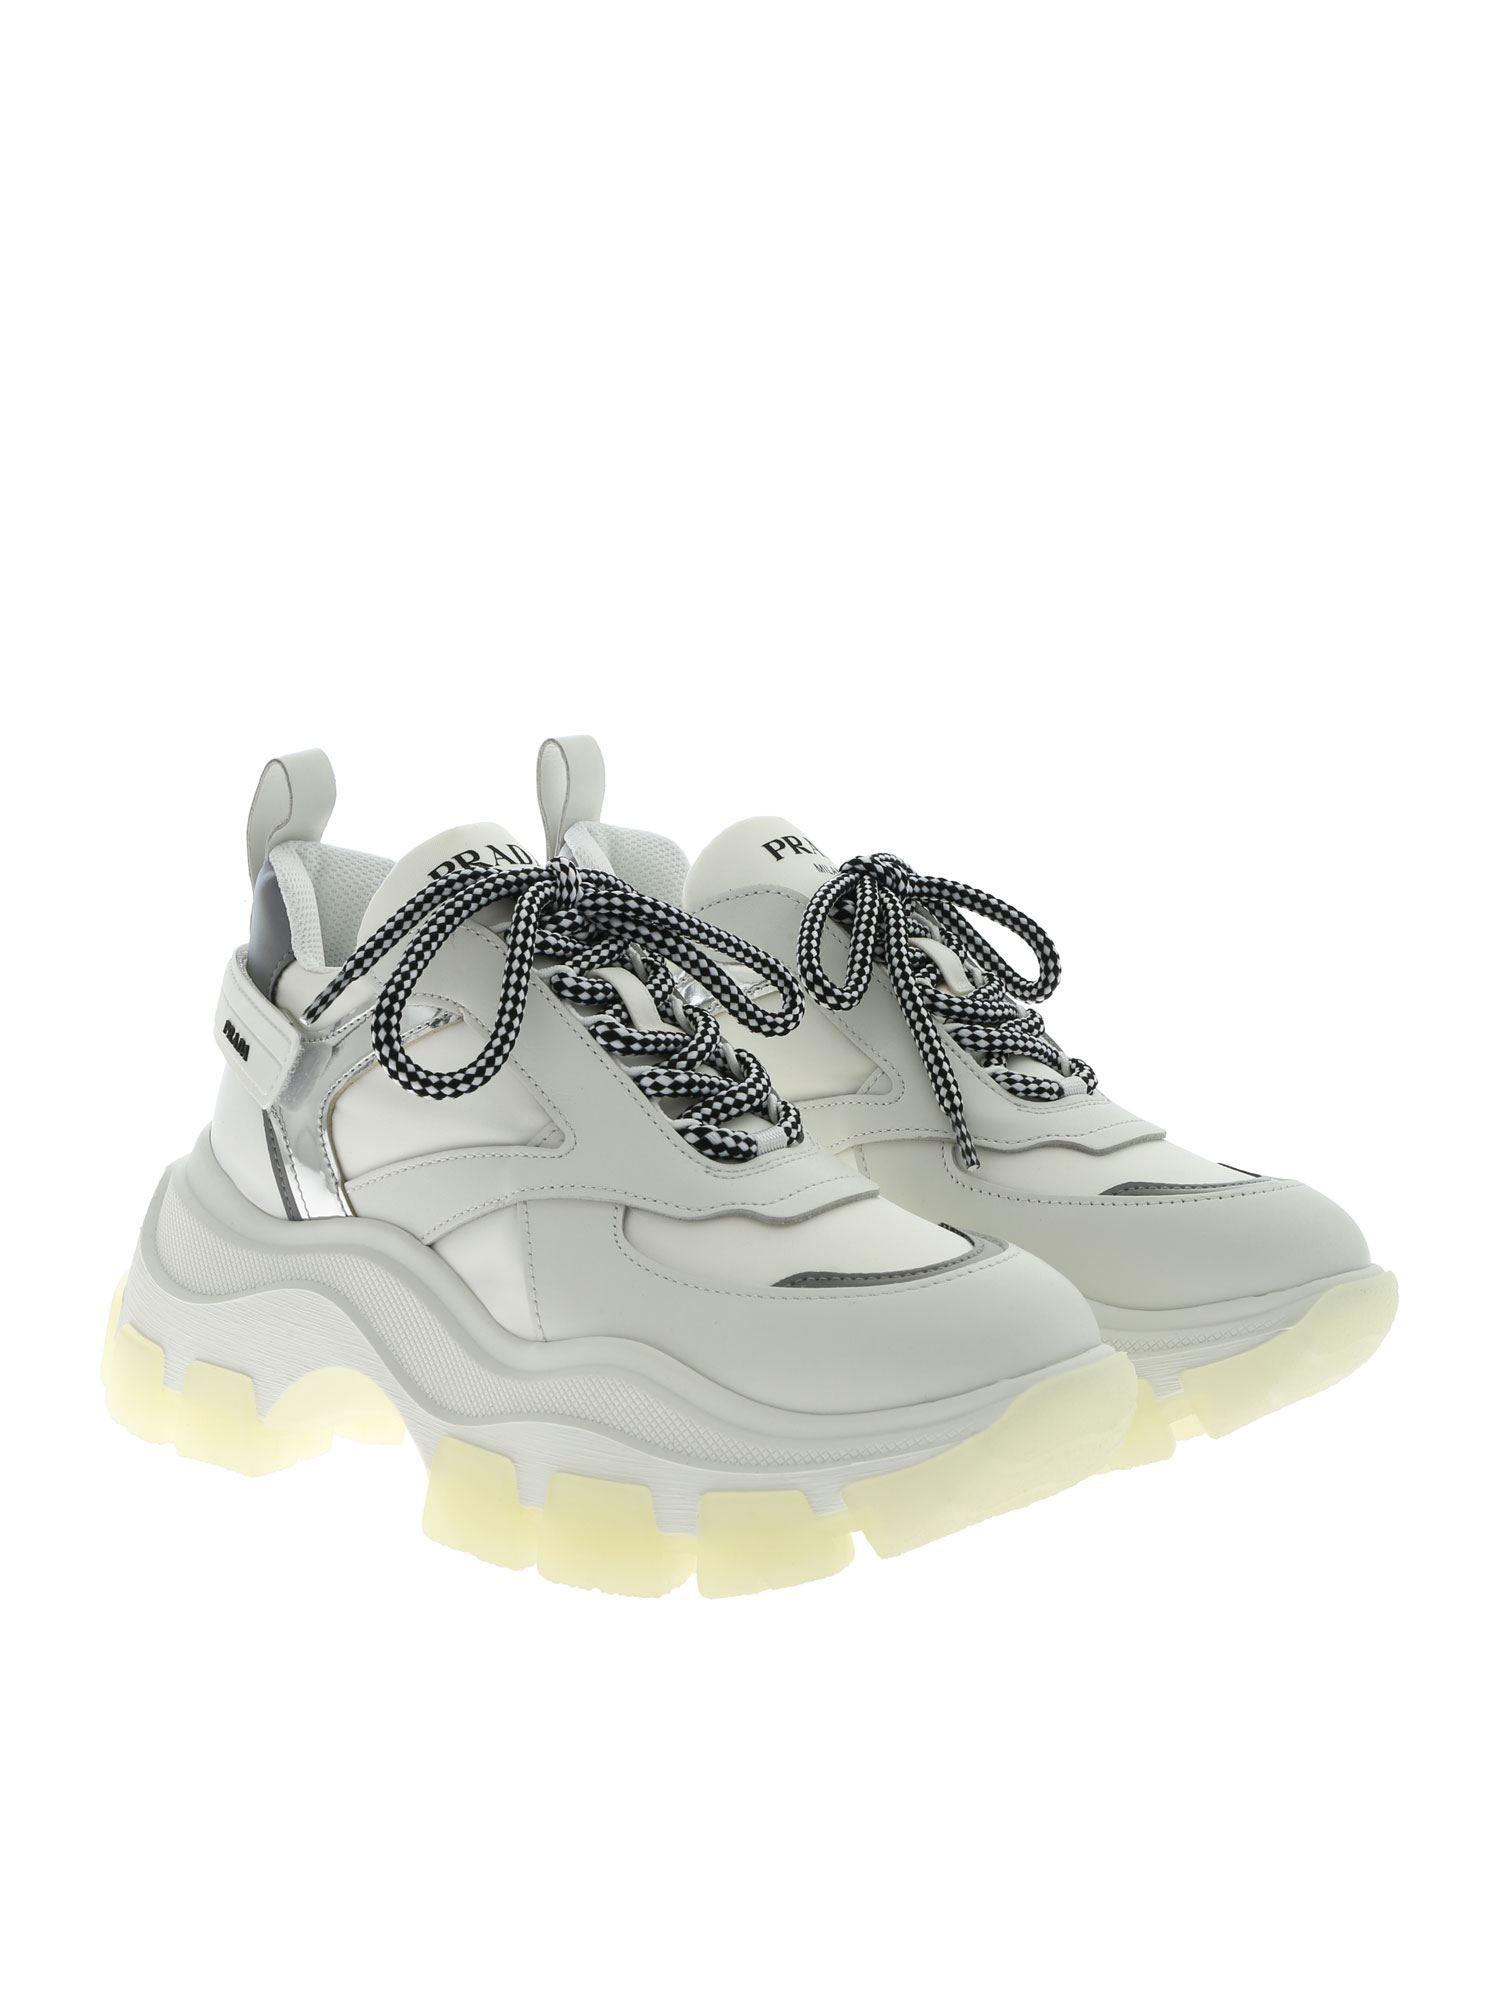 Prada Leather Block Sneakers In White And Silver - Lyst